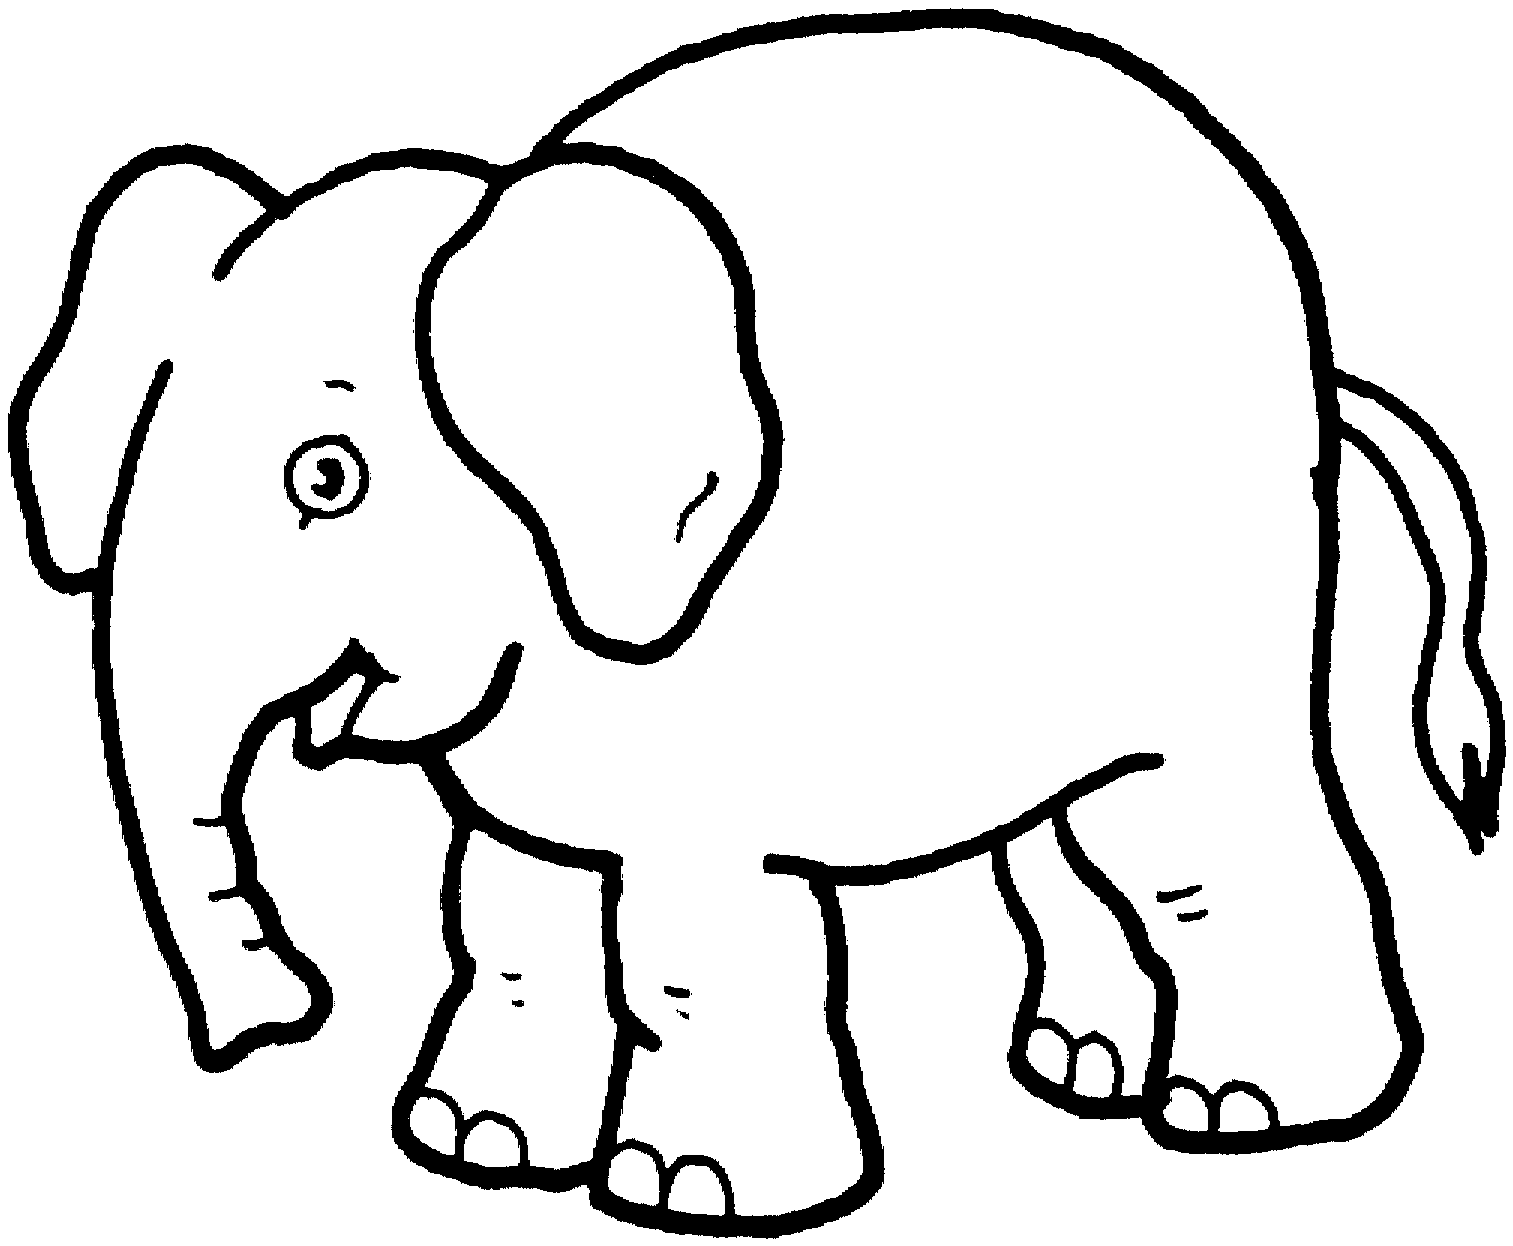 Free Elephants Pictures For Kids, Download Free Elephants Pictures ...